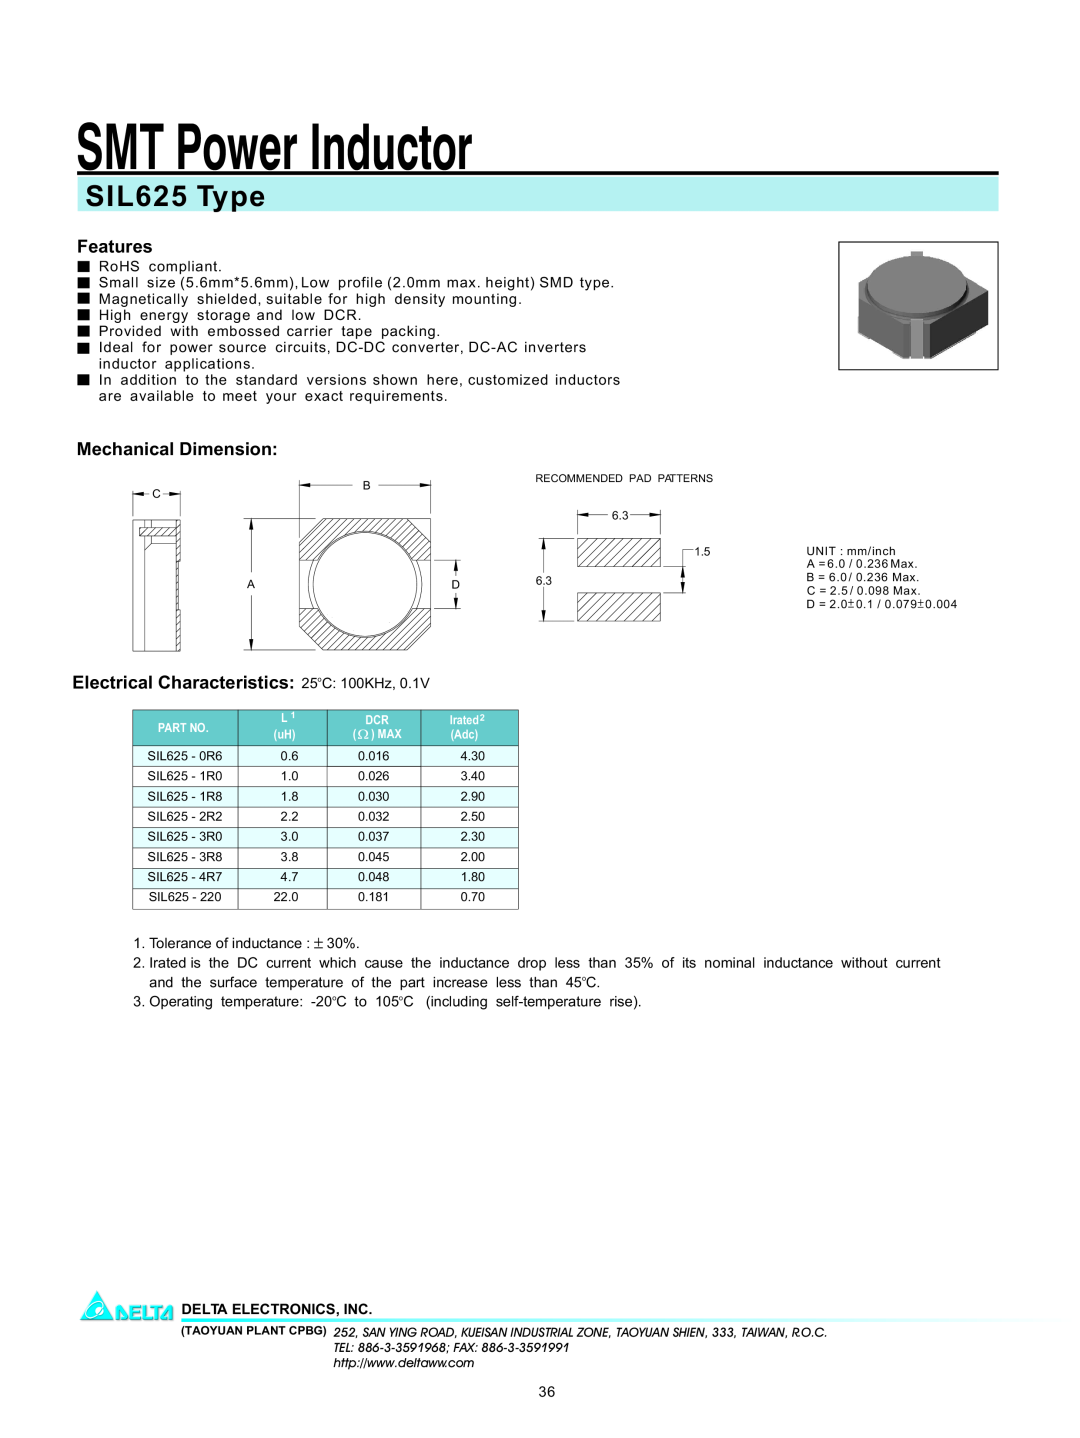 Delta Electronics manual SMT Power Inductor, SIL625 Type, Features, Mechanical Dimension, Delta Electronics, Inc 